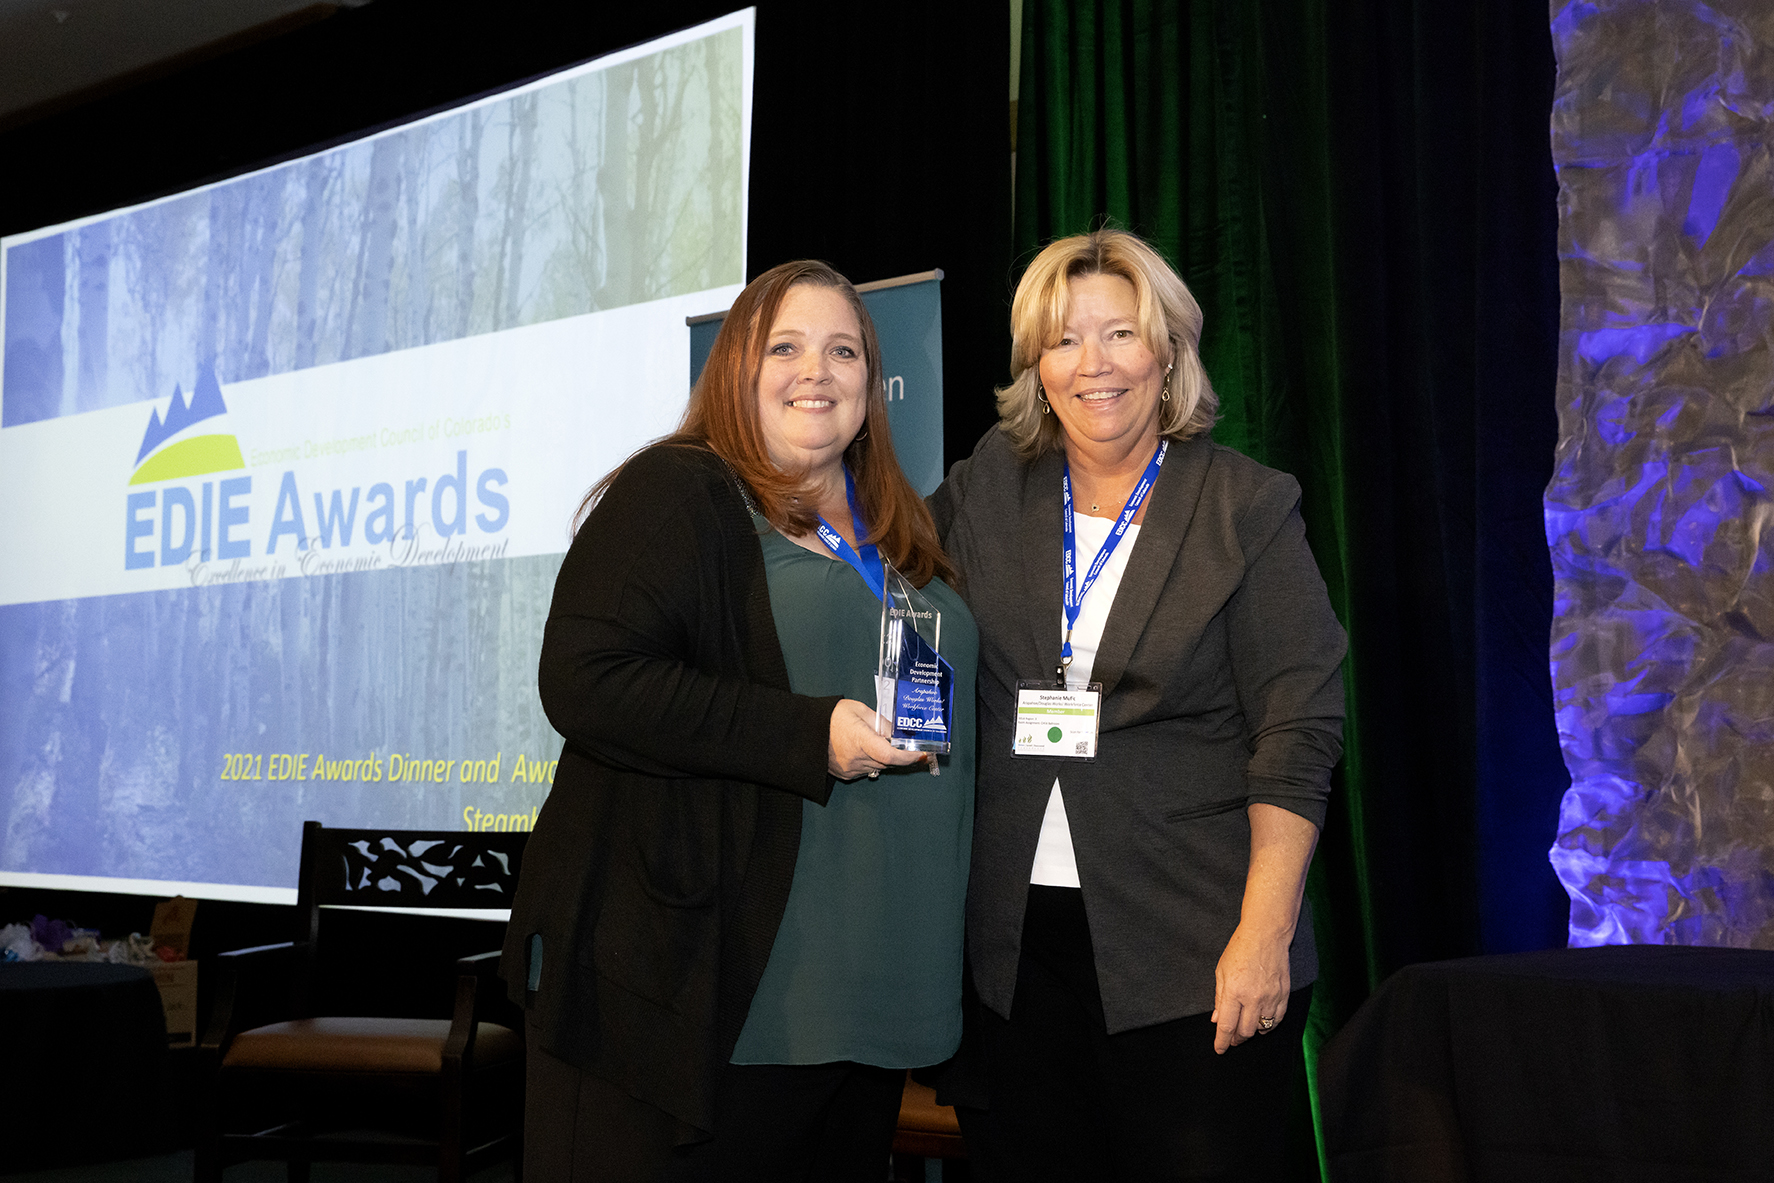 The Economic Development Council of Colorado (EDCC) acknowledged A/D Works! with the Partnership of the Year honor in a ceremony held in Steamboat Springs last week. A/D Works! is keeping Colorado’s economy moving forward and improving quality of life for our residents.